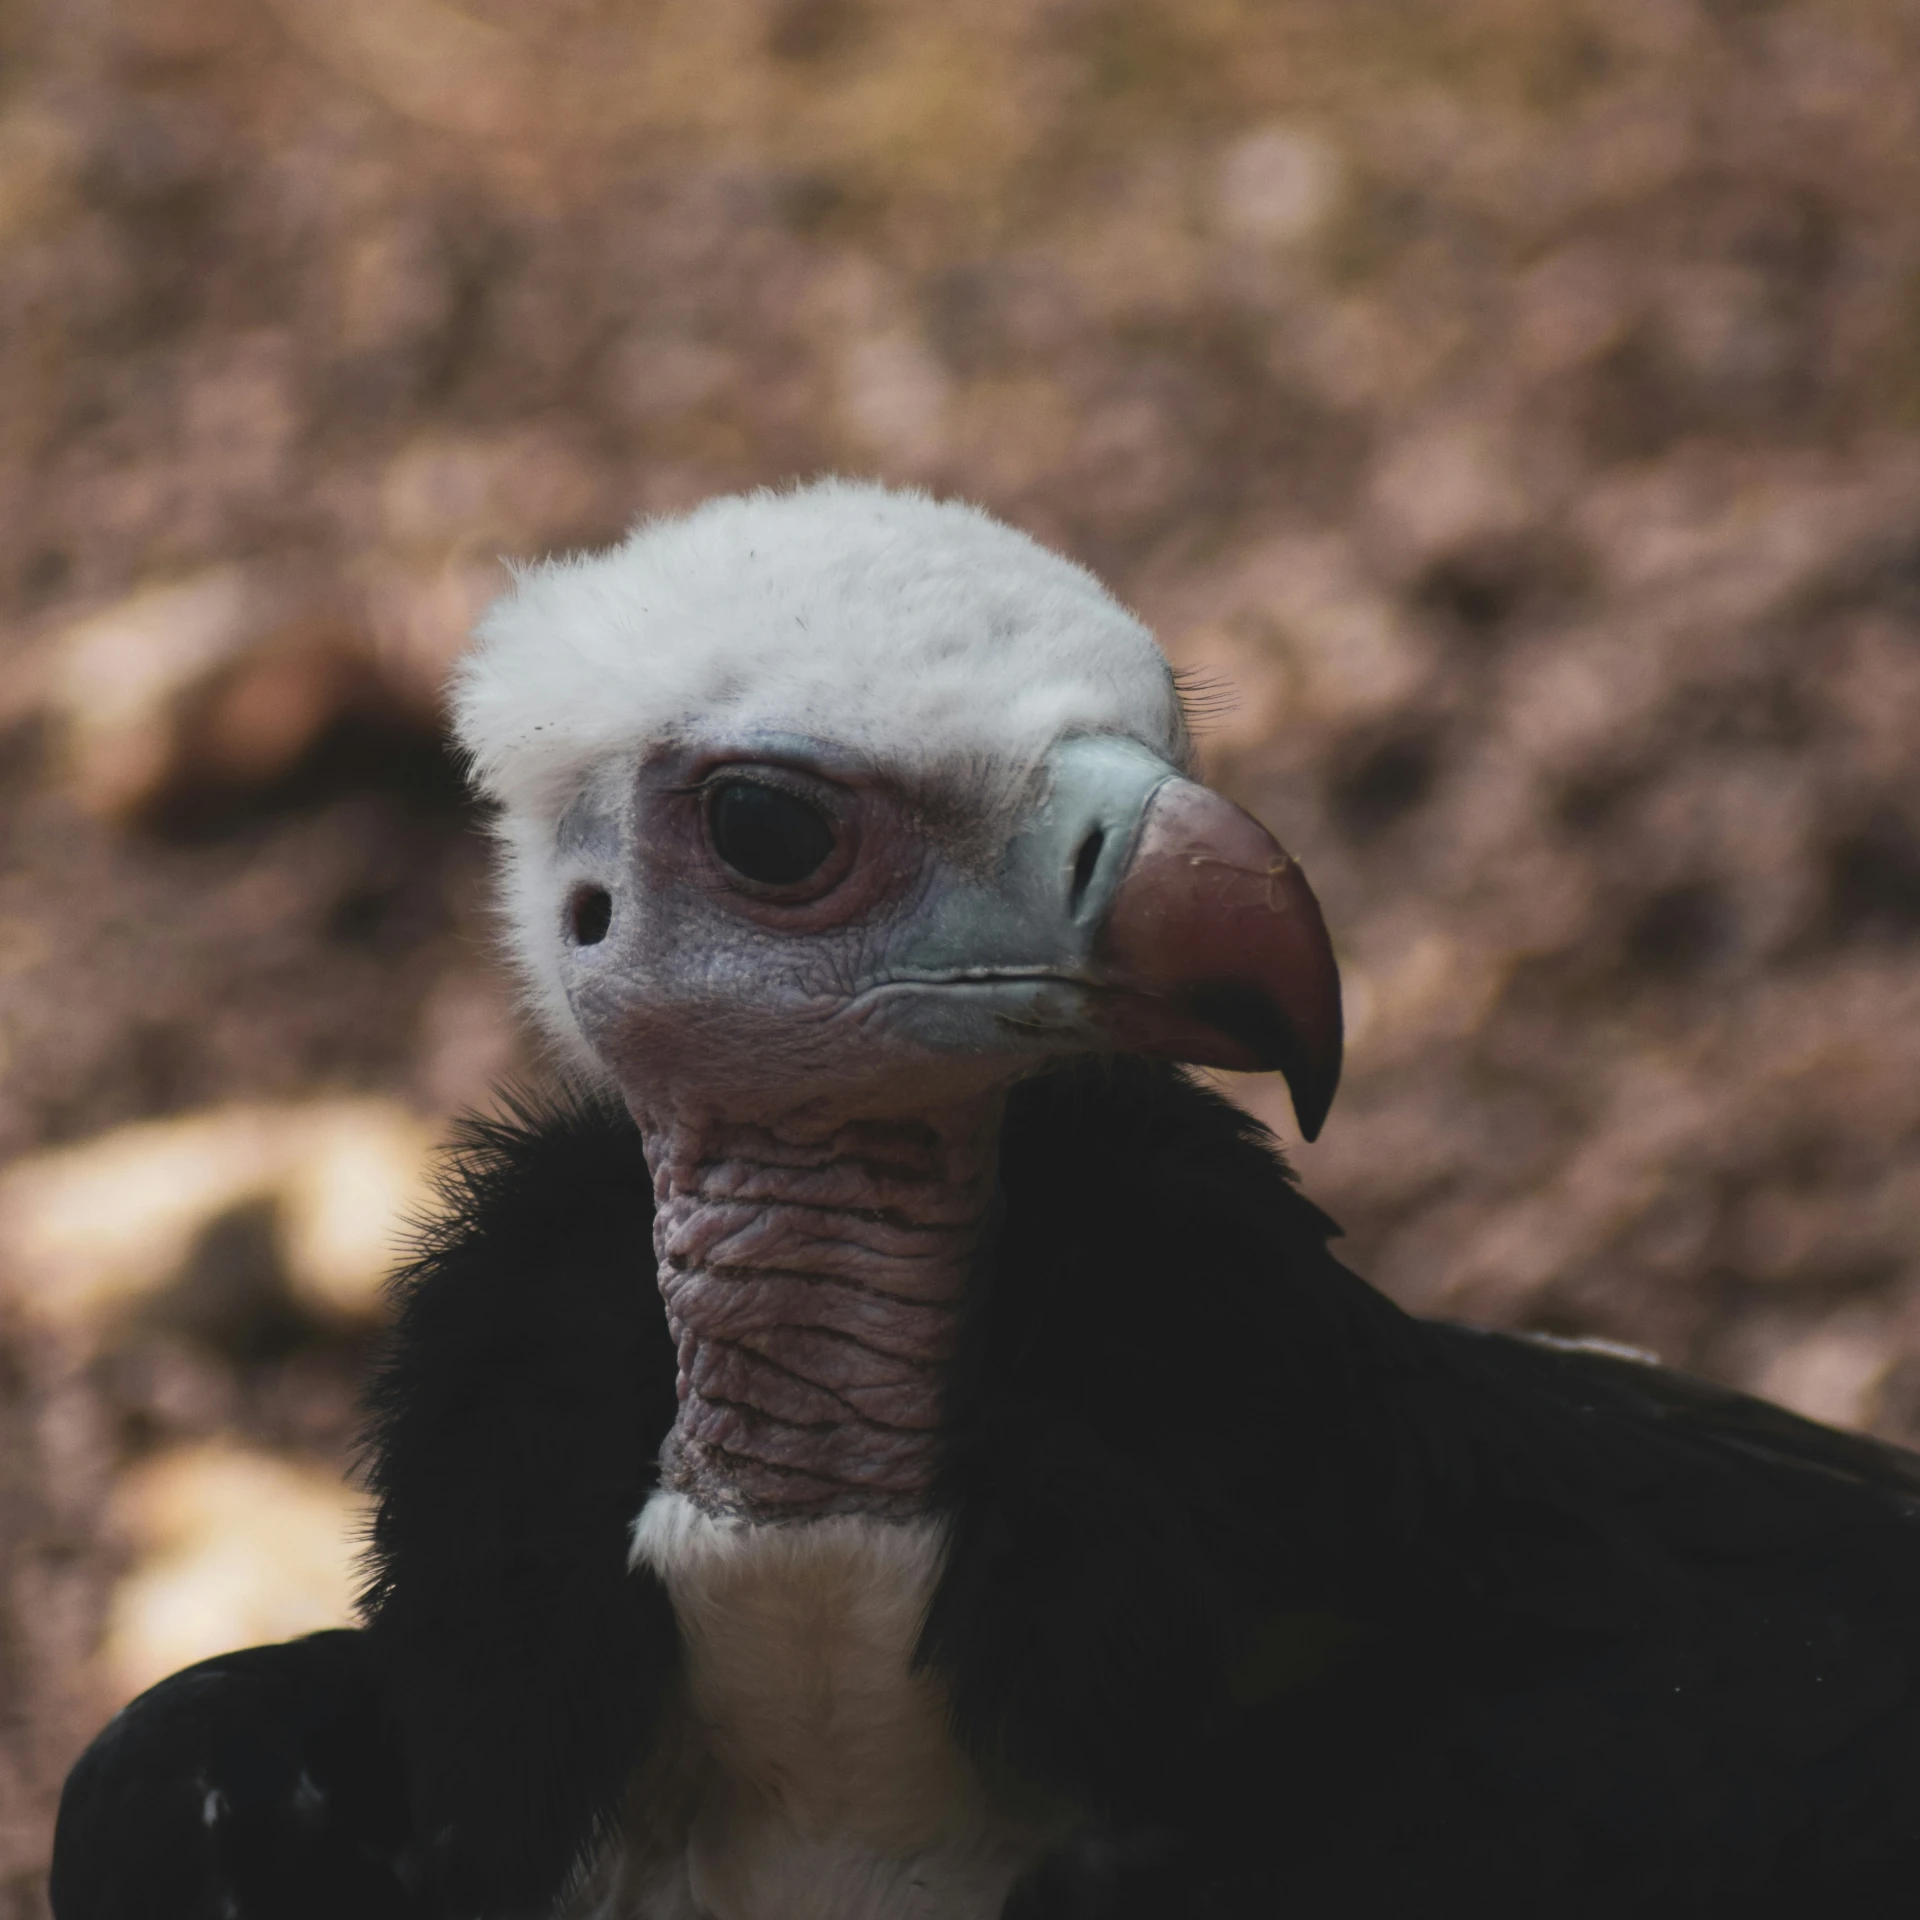 this is an image of the head and beak of a vulture